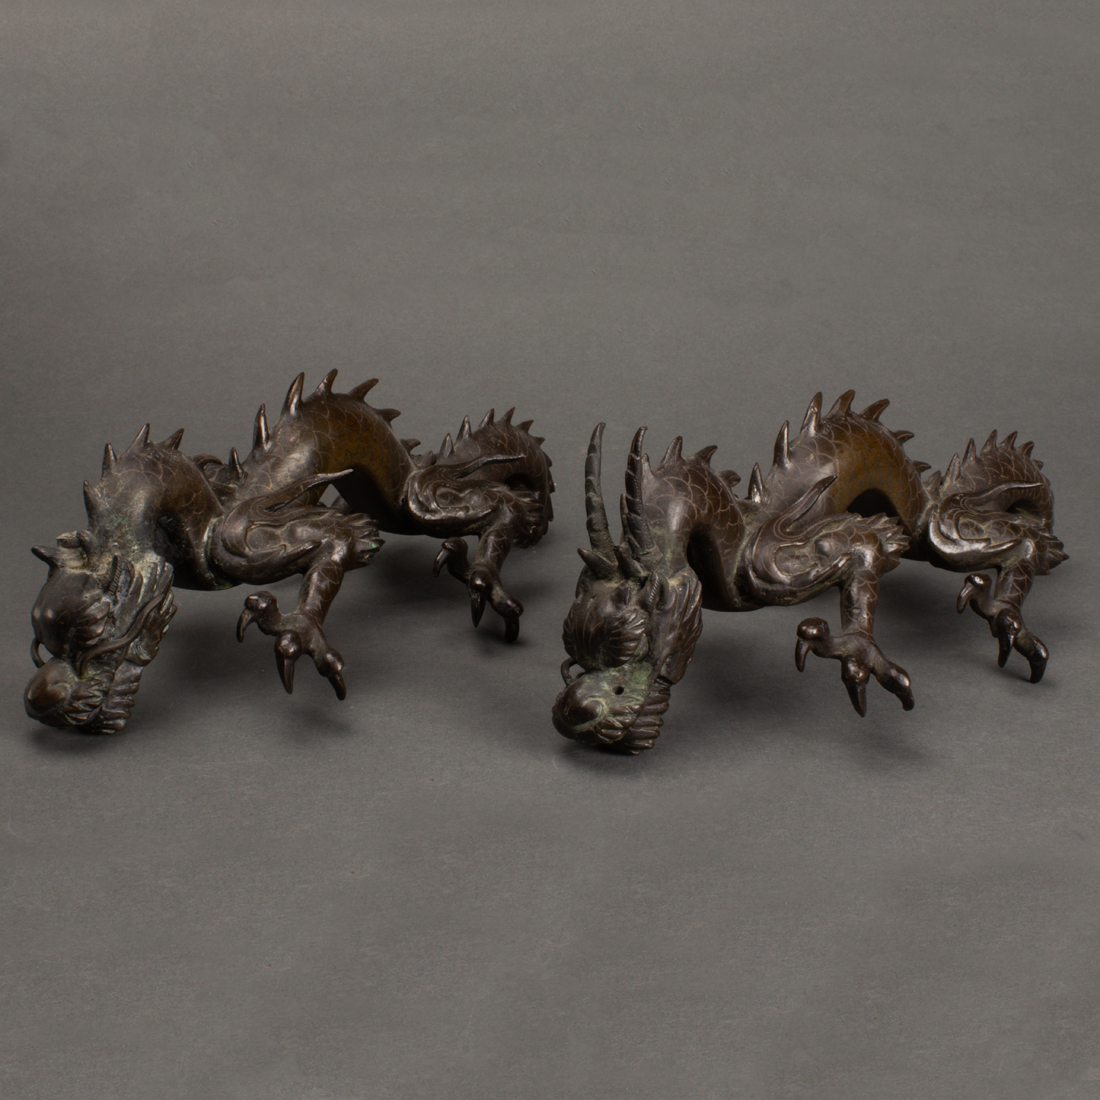 PAIR OF JAPANESE BRONZE DRAGONS 3a2ddf